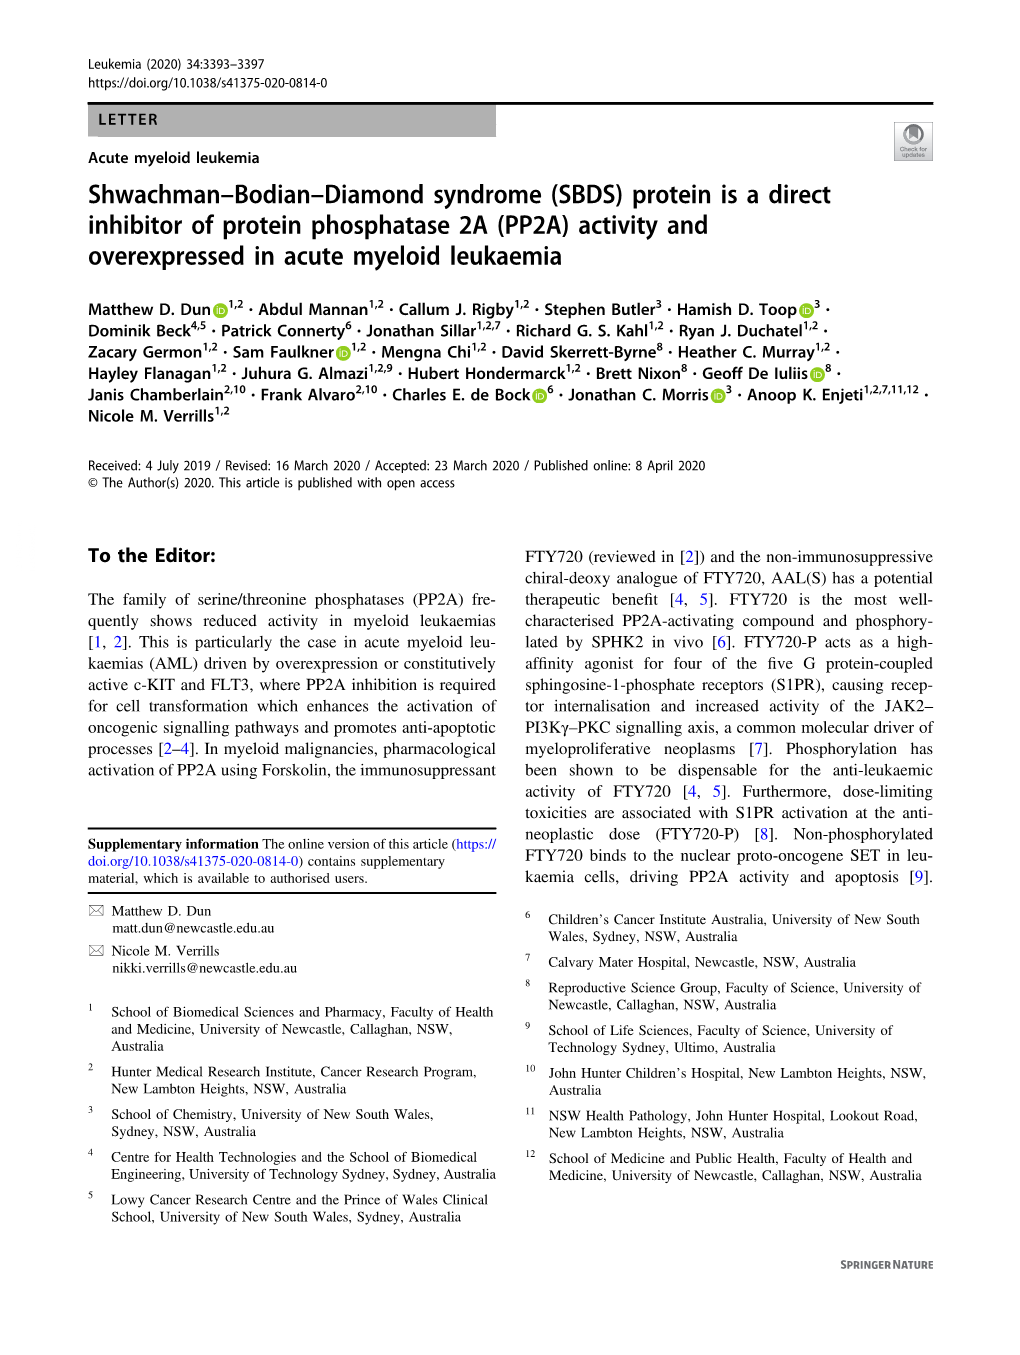 (SBDS) Protein Is a Direct Inhibitor of Protein Phosphatase 2A (PP2A) Activity and Overexpressed in Acute Myeloid Leukaemia